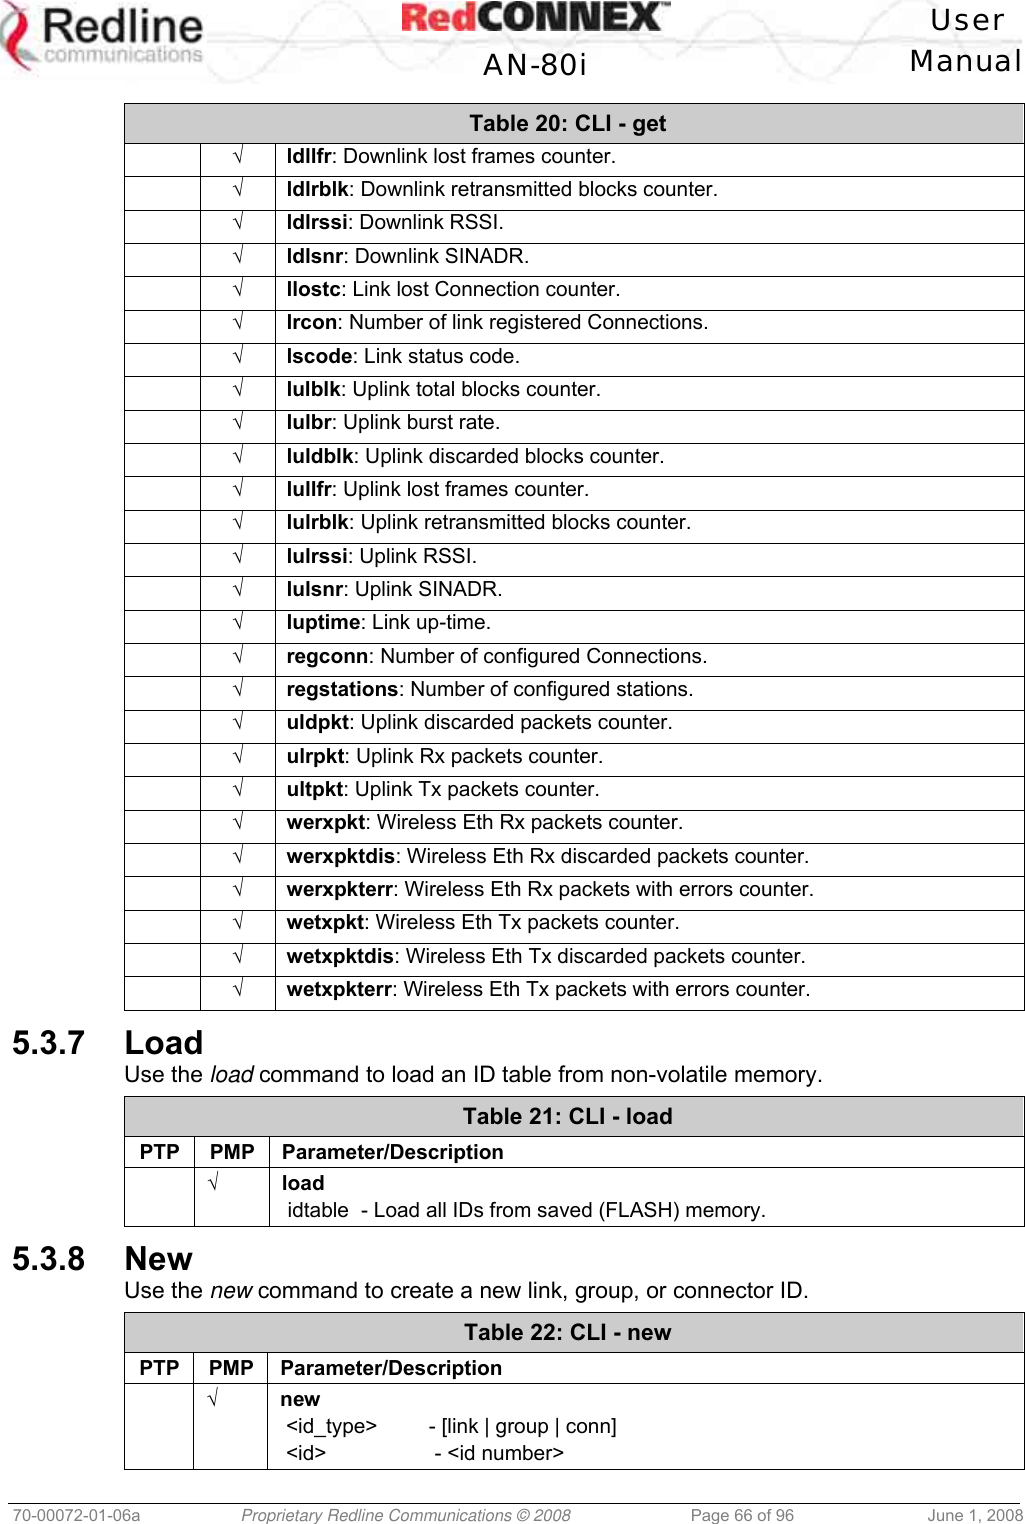   User  AN-80i Manual  70-00072-01-06a  Proprietary Redline Communications © 2008  Page 66 of 96  June 1, 2008 Table 20: CLI - get  √ ldllfr: Downlink lost frames counter.  √ ldlrblk: Downlink retransmitted blocks counter.  √ ldlrssi: Downlink RSSI.  √ ldlsnr: Downlink SINADR.  √ llostc: Link lost Connection counter.  √ lrcon: Number of link registered Connections.  √ lscode: Link status code.  √ lulblk: Uplink total blocks counter.  √ lulbr: Uplink burst rate.  √ luldblk: Uplink discarded blocks counter.  √ lullfr: Uplink lost frames counter.  √ lulrblk: Uplink retransmitted blocks counter.  √ lulrssi: Uplink RSSI.  √ lulsnr: Uplink SINADR.  √ luptime: Link up-time.  √ regconn: Number of configured Connections.  √ regstations: Number of configured stations.  √ uldpkt: Uplink discarded packets counter.  √ ulrpkt: Uplink Rx packets counter.  √ ultpkt: Uplink Tx packets counter.  √ werxpkt: Wireless Eth Rx packets counter.  √ werxpktdis: Wireless Eth Rx discarded packets counter.  √ werxpkterr: Wireless Eth Rx packets with errors counter.  √ wetxpkt: Wireless Eth Tx packets counter.  √ wetxpktdis: Wireless Eth Tx discarded packets counter.  √ wetxpkterr: Wireless Eth Tx packets with errors counter. 5.3.7 Load Use the load command to load an ID table from non-volatile memory. Table 21: CLI - load PTP PMP Parameter/Description  √ load  idtable  - Load all IDs from saved (FLASH) memory. 5.3.8 New Use the new command to create a new link, group, or connector ID. Table 22: CLI - new PTP PMP Parameter/Description  √ new  &lt;id_type&gt;  - [link | group | conn]  &lt;id&gt;     - &lt;id number&gt;  